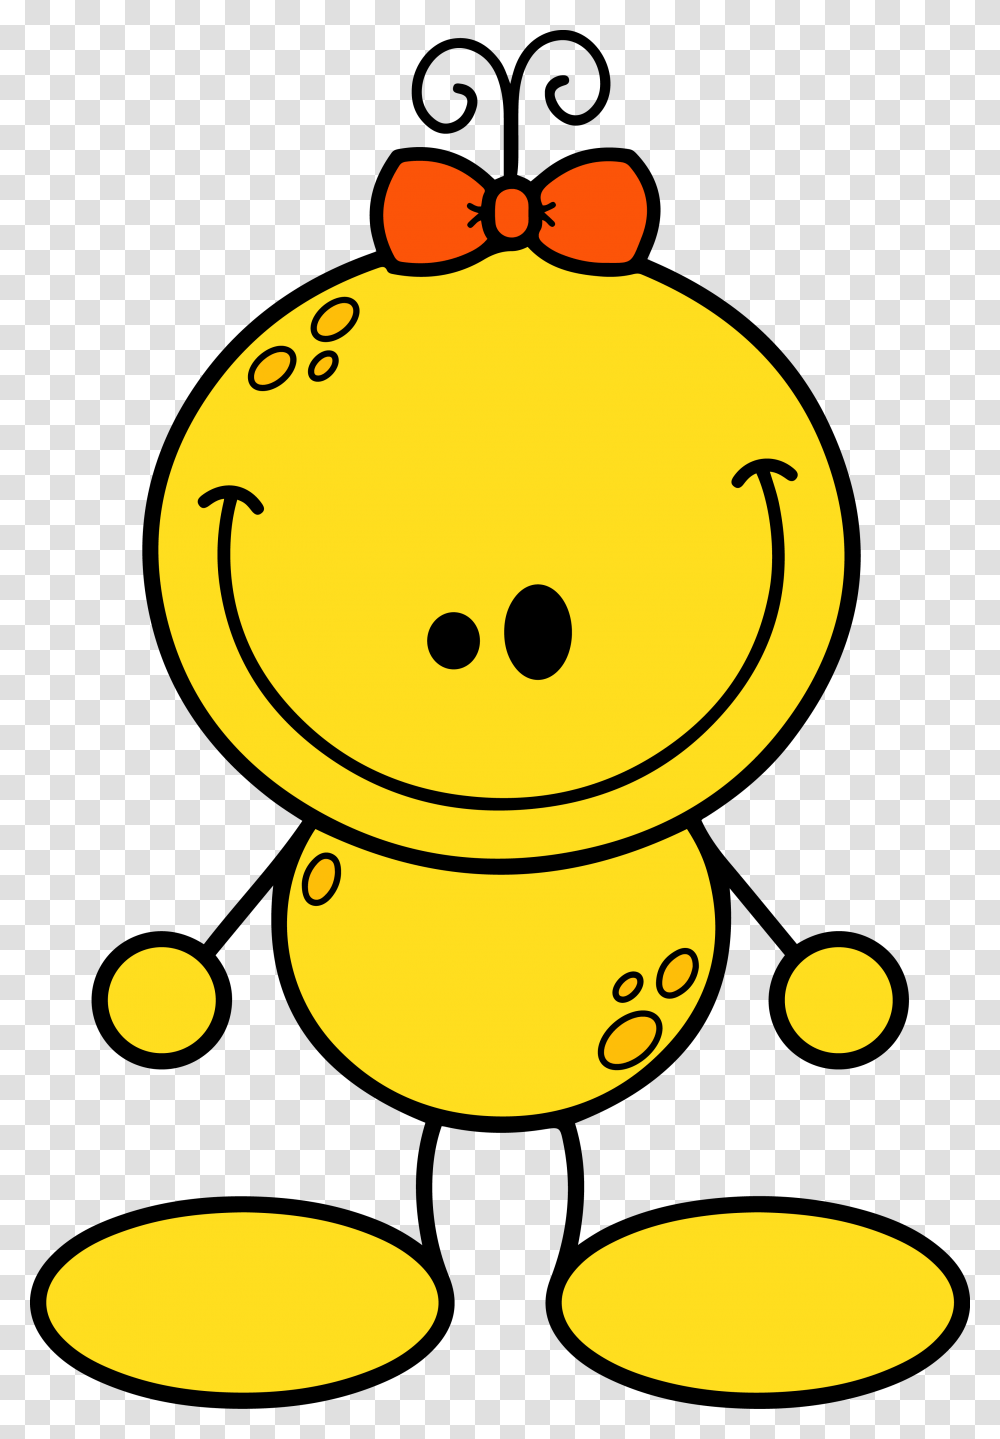 Explore Smiley Alien And More, Toy, Outdoors, Nature, Teddy Bear Transparent Png